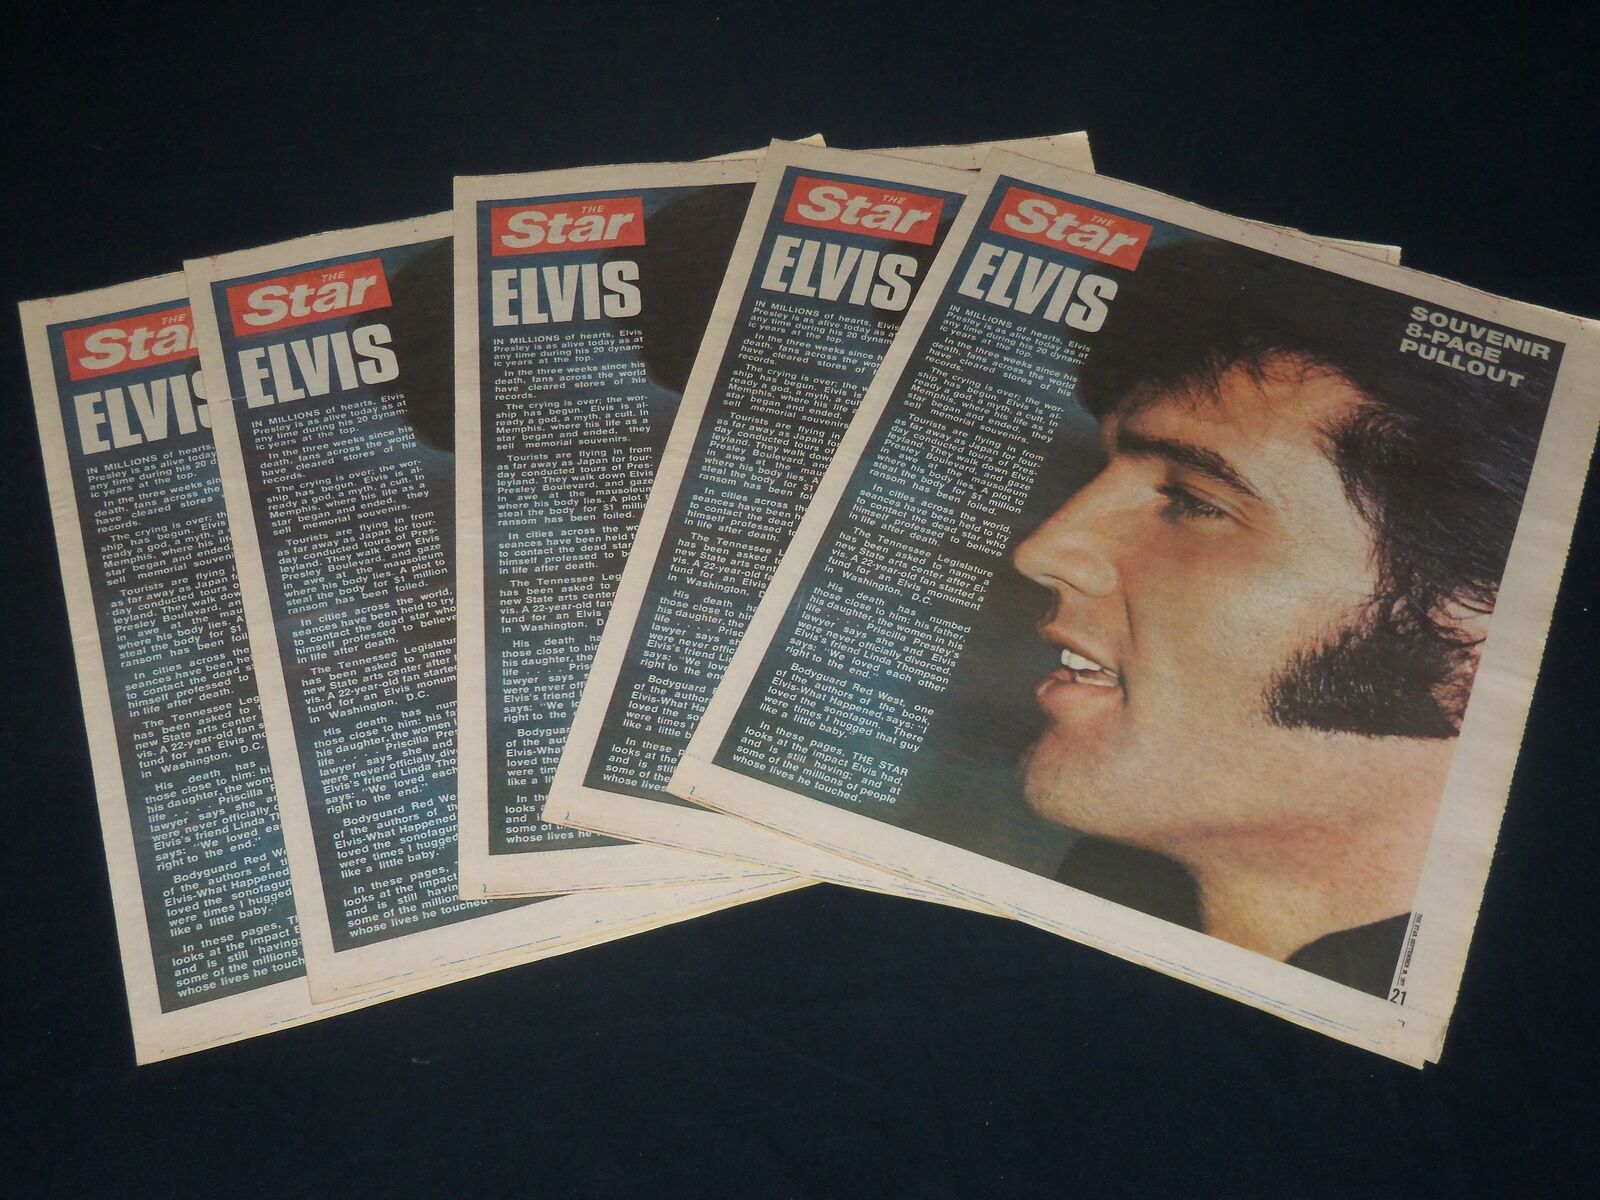 1977 THE STAR NEWSPAPER LOT OF 5 - ELVIS SOUVENIR 8-PAGE PULLOUT - NP 4900